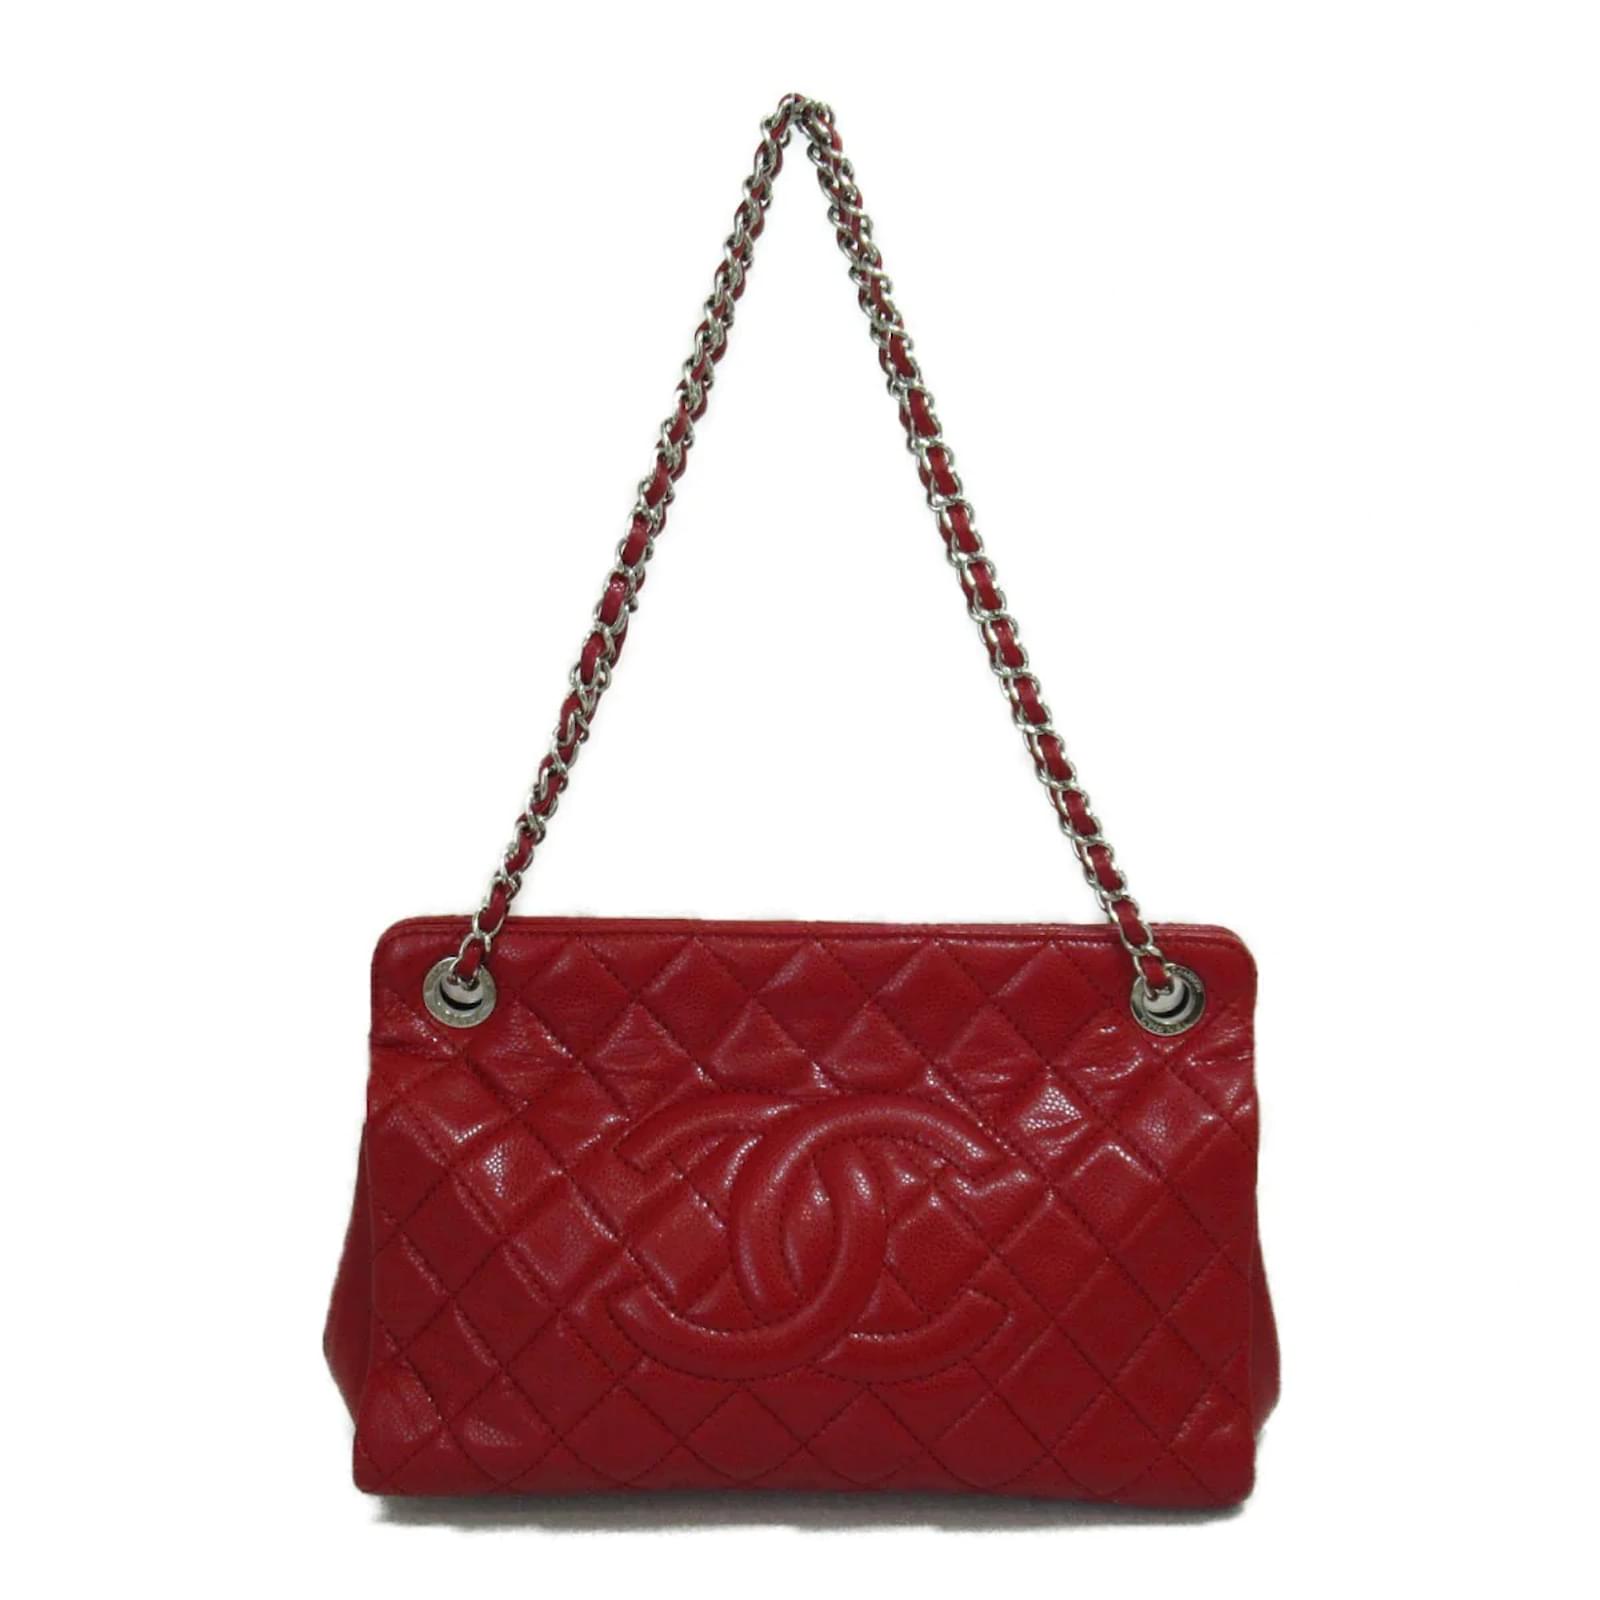 Chanel Top Handle Quilted Leather Shoulder Bag Red